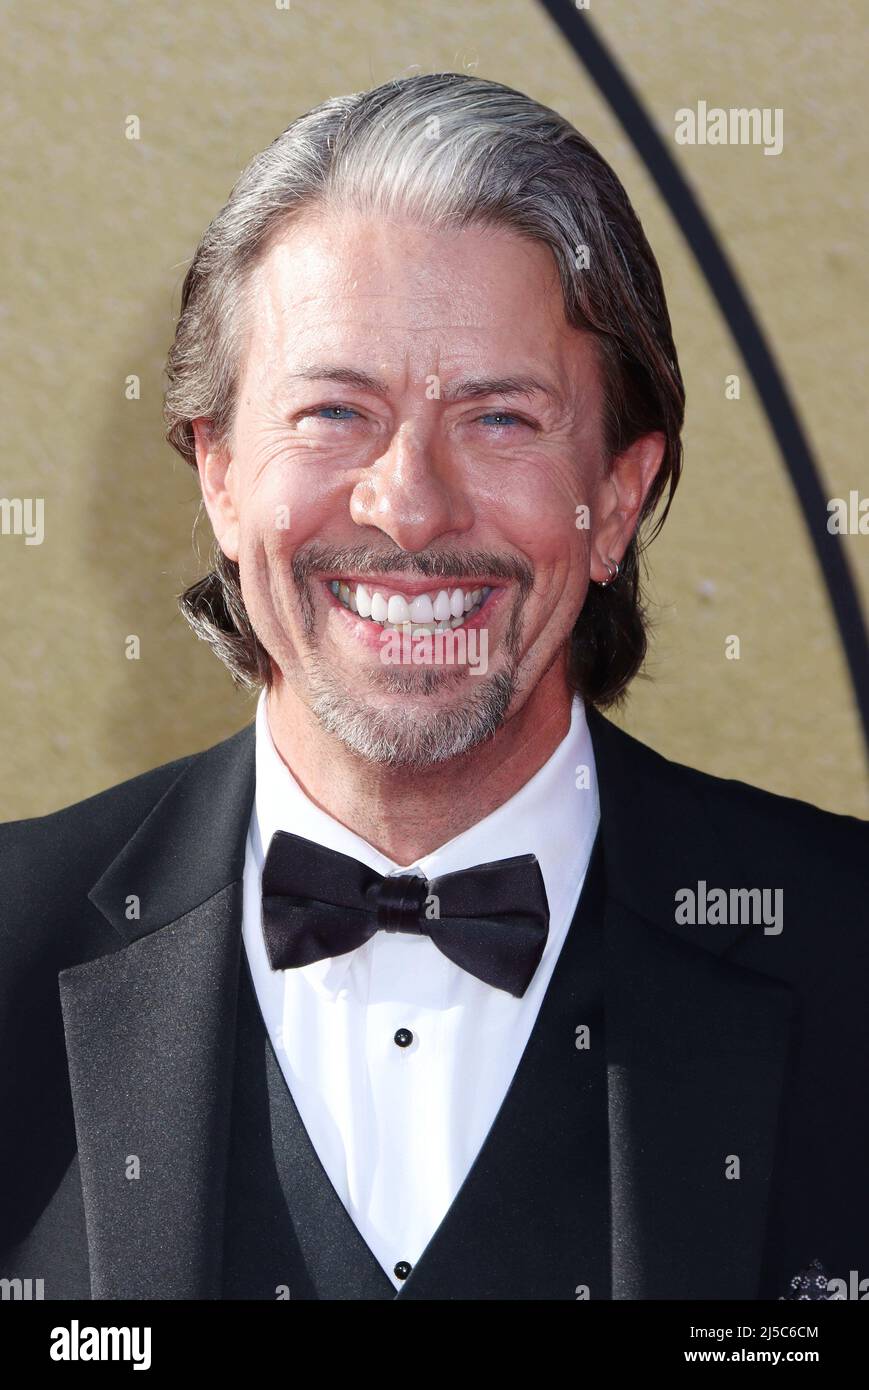 Los Angeles, USA. 21st Apr, 2022. Sean Frye 2022/04/21 The 40th Anniversary Screening of “E.T. the Extra-Terrestrial” held at TCL Chinese Theatre in Hollywood, CA, Credit: Cronos/Alamy Live News Stock Photo